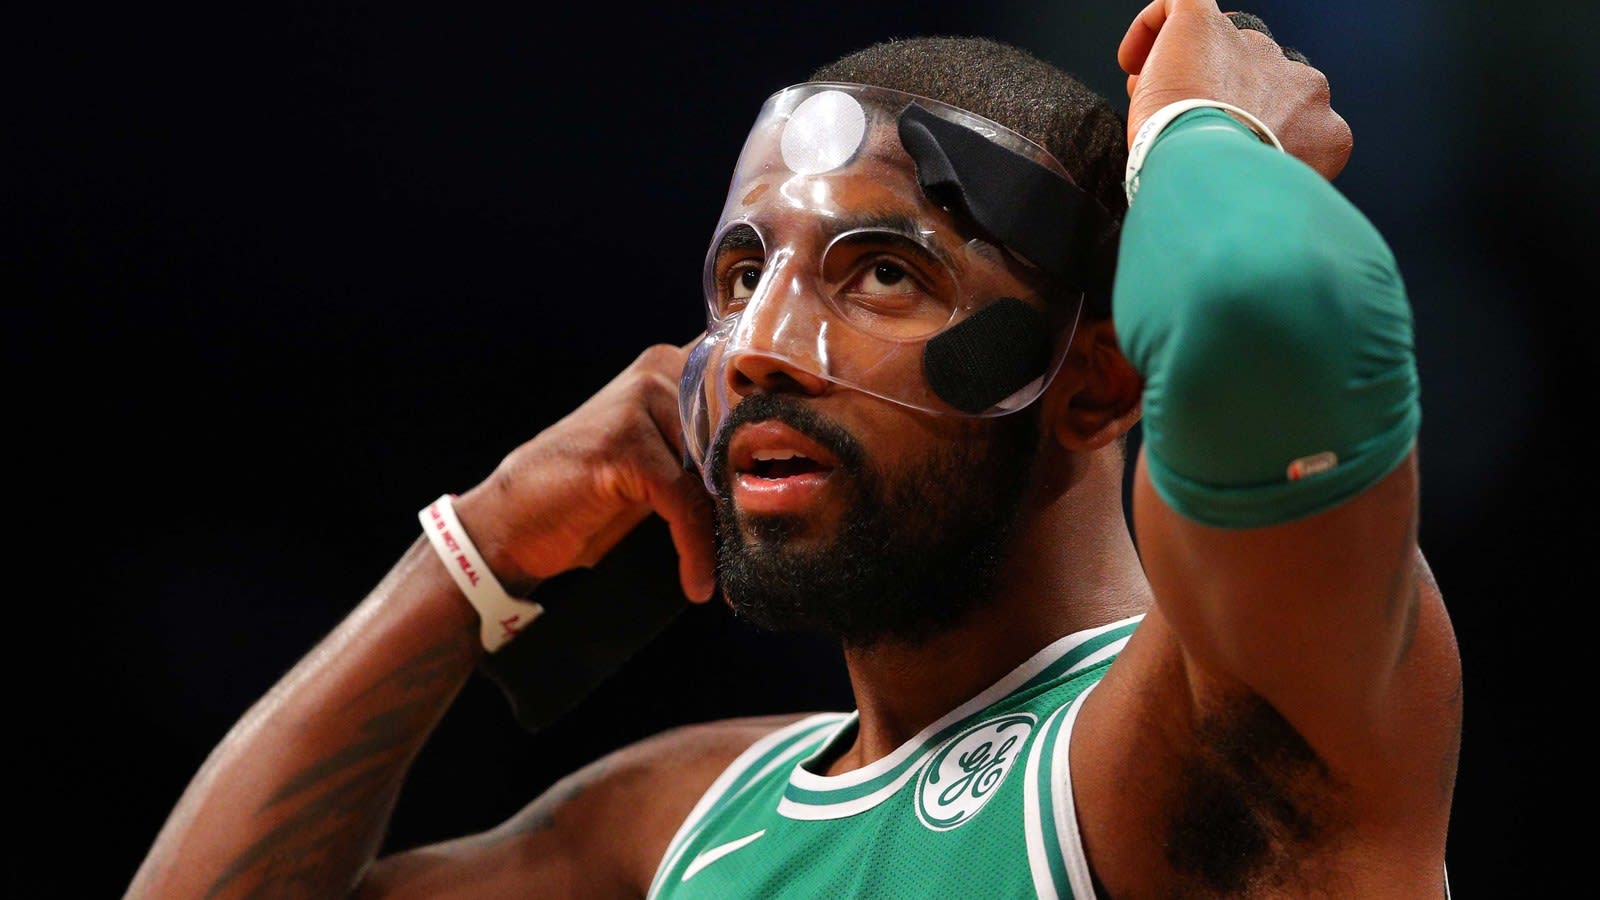 Kyrie Irving explains why he is wearing clear mask instead of black